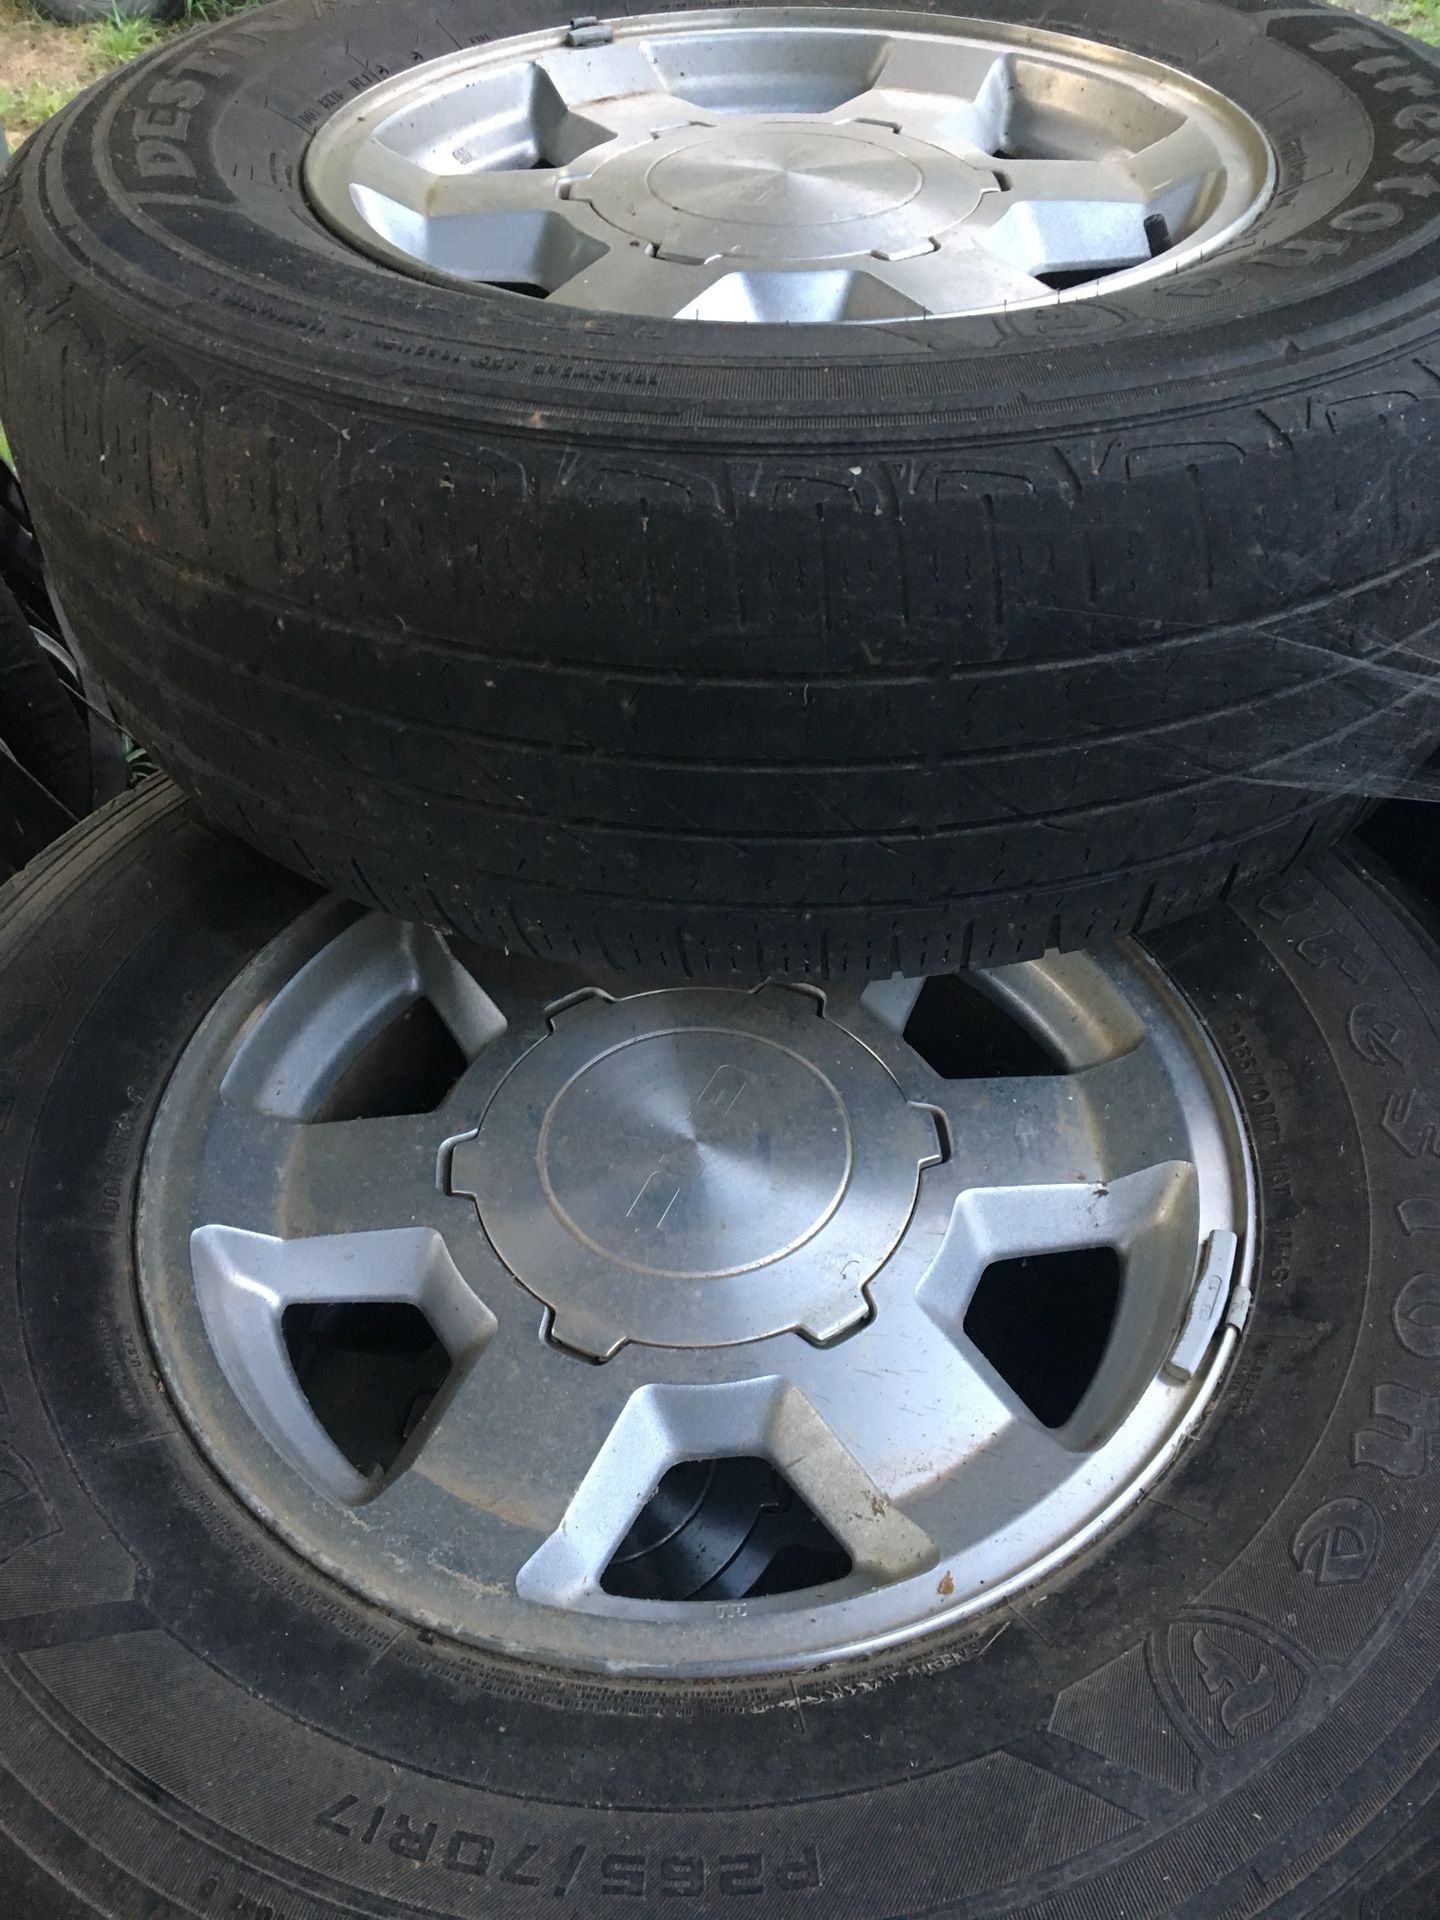 8 factory GM aluminum wheels and tires with caps and lugs. 4 are off 2005 GMC Yukon 17inch. 4 are off a 2002 Chevy Tahoe 16 inch. Tires are not great